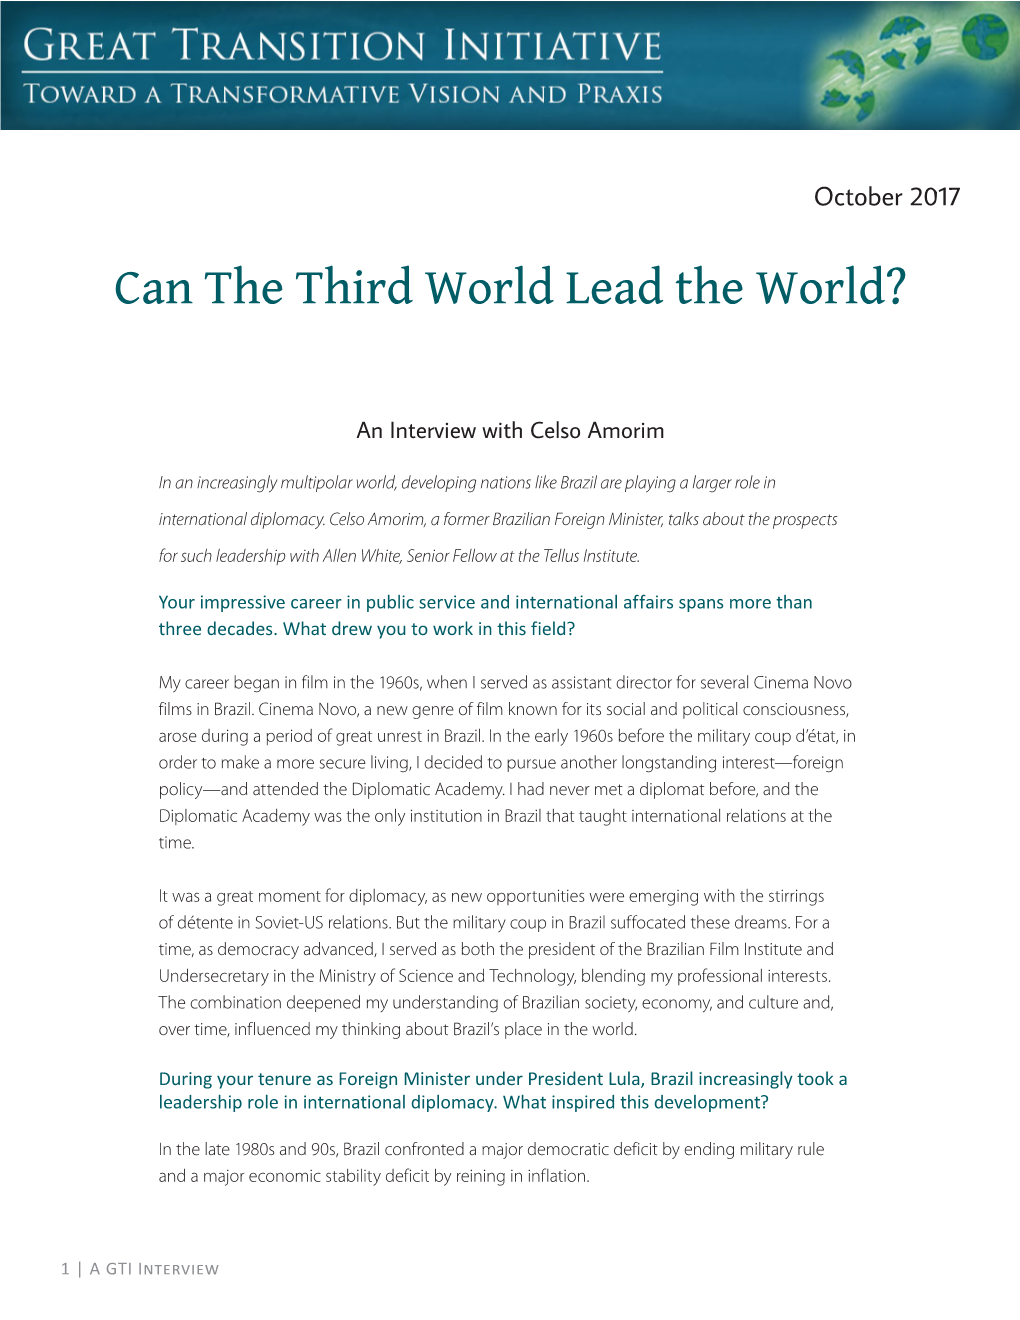 Can the Third World Lead the World?